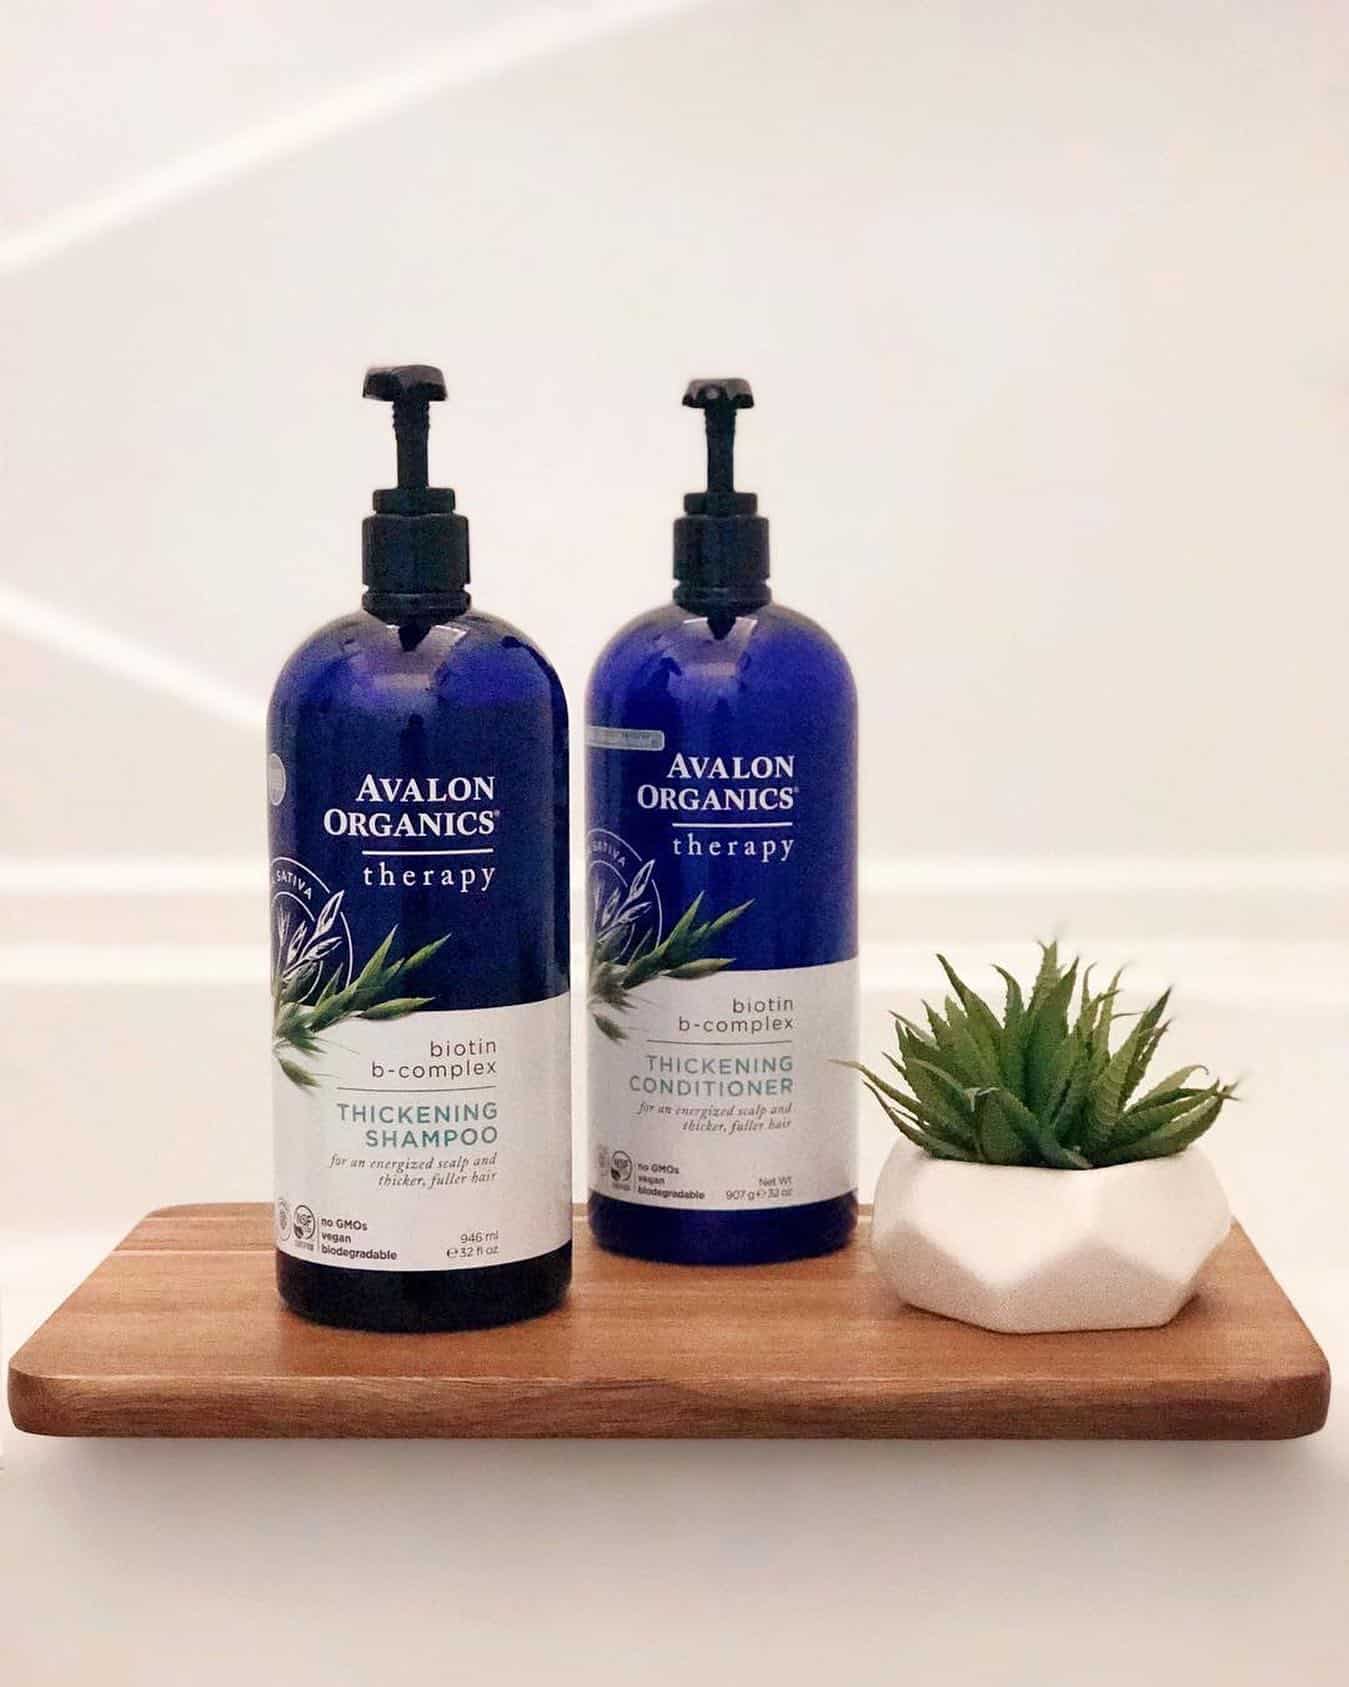 bottles of thickening shampoo and conditioner by avalon organics